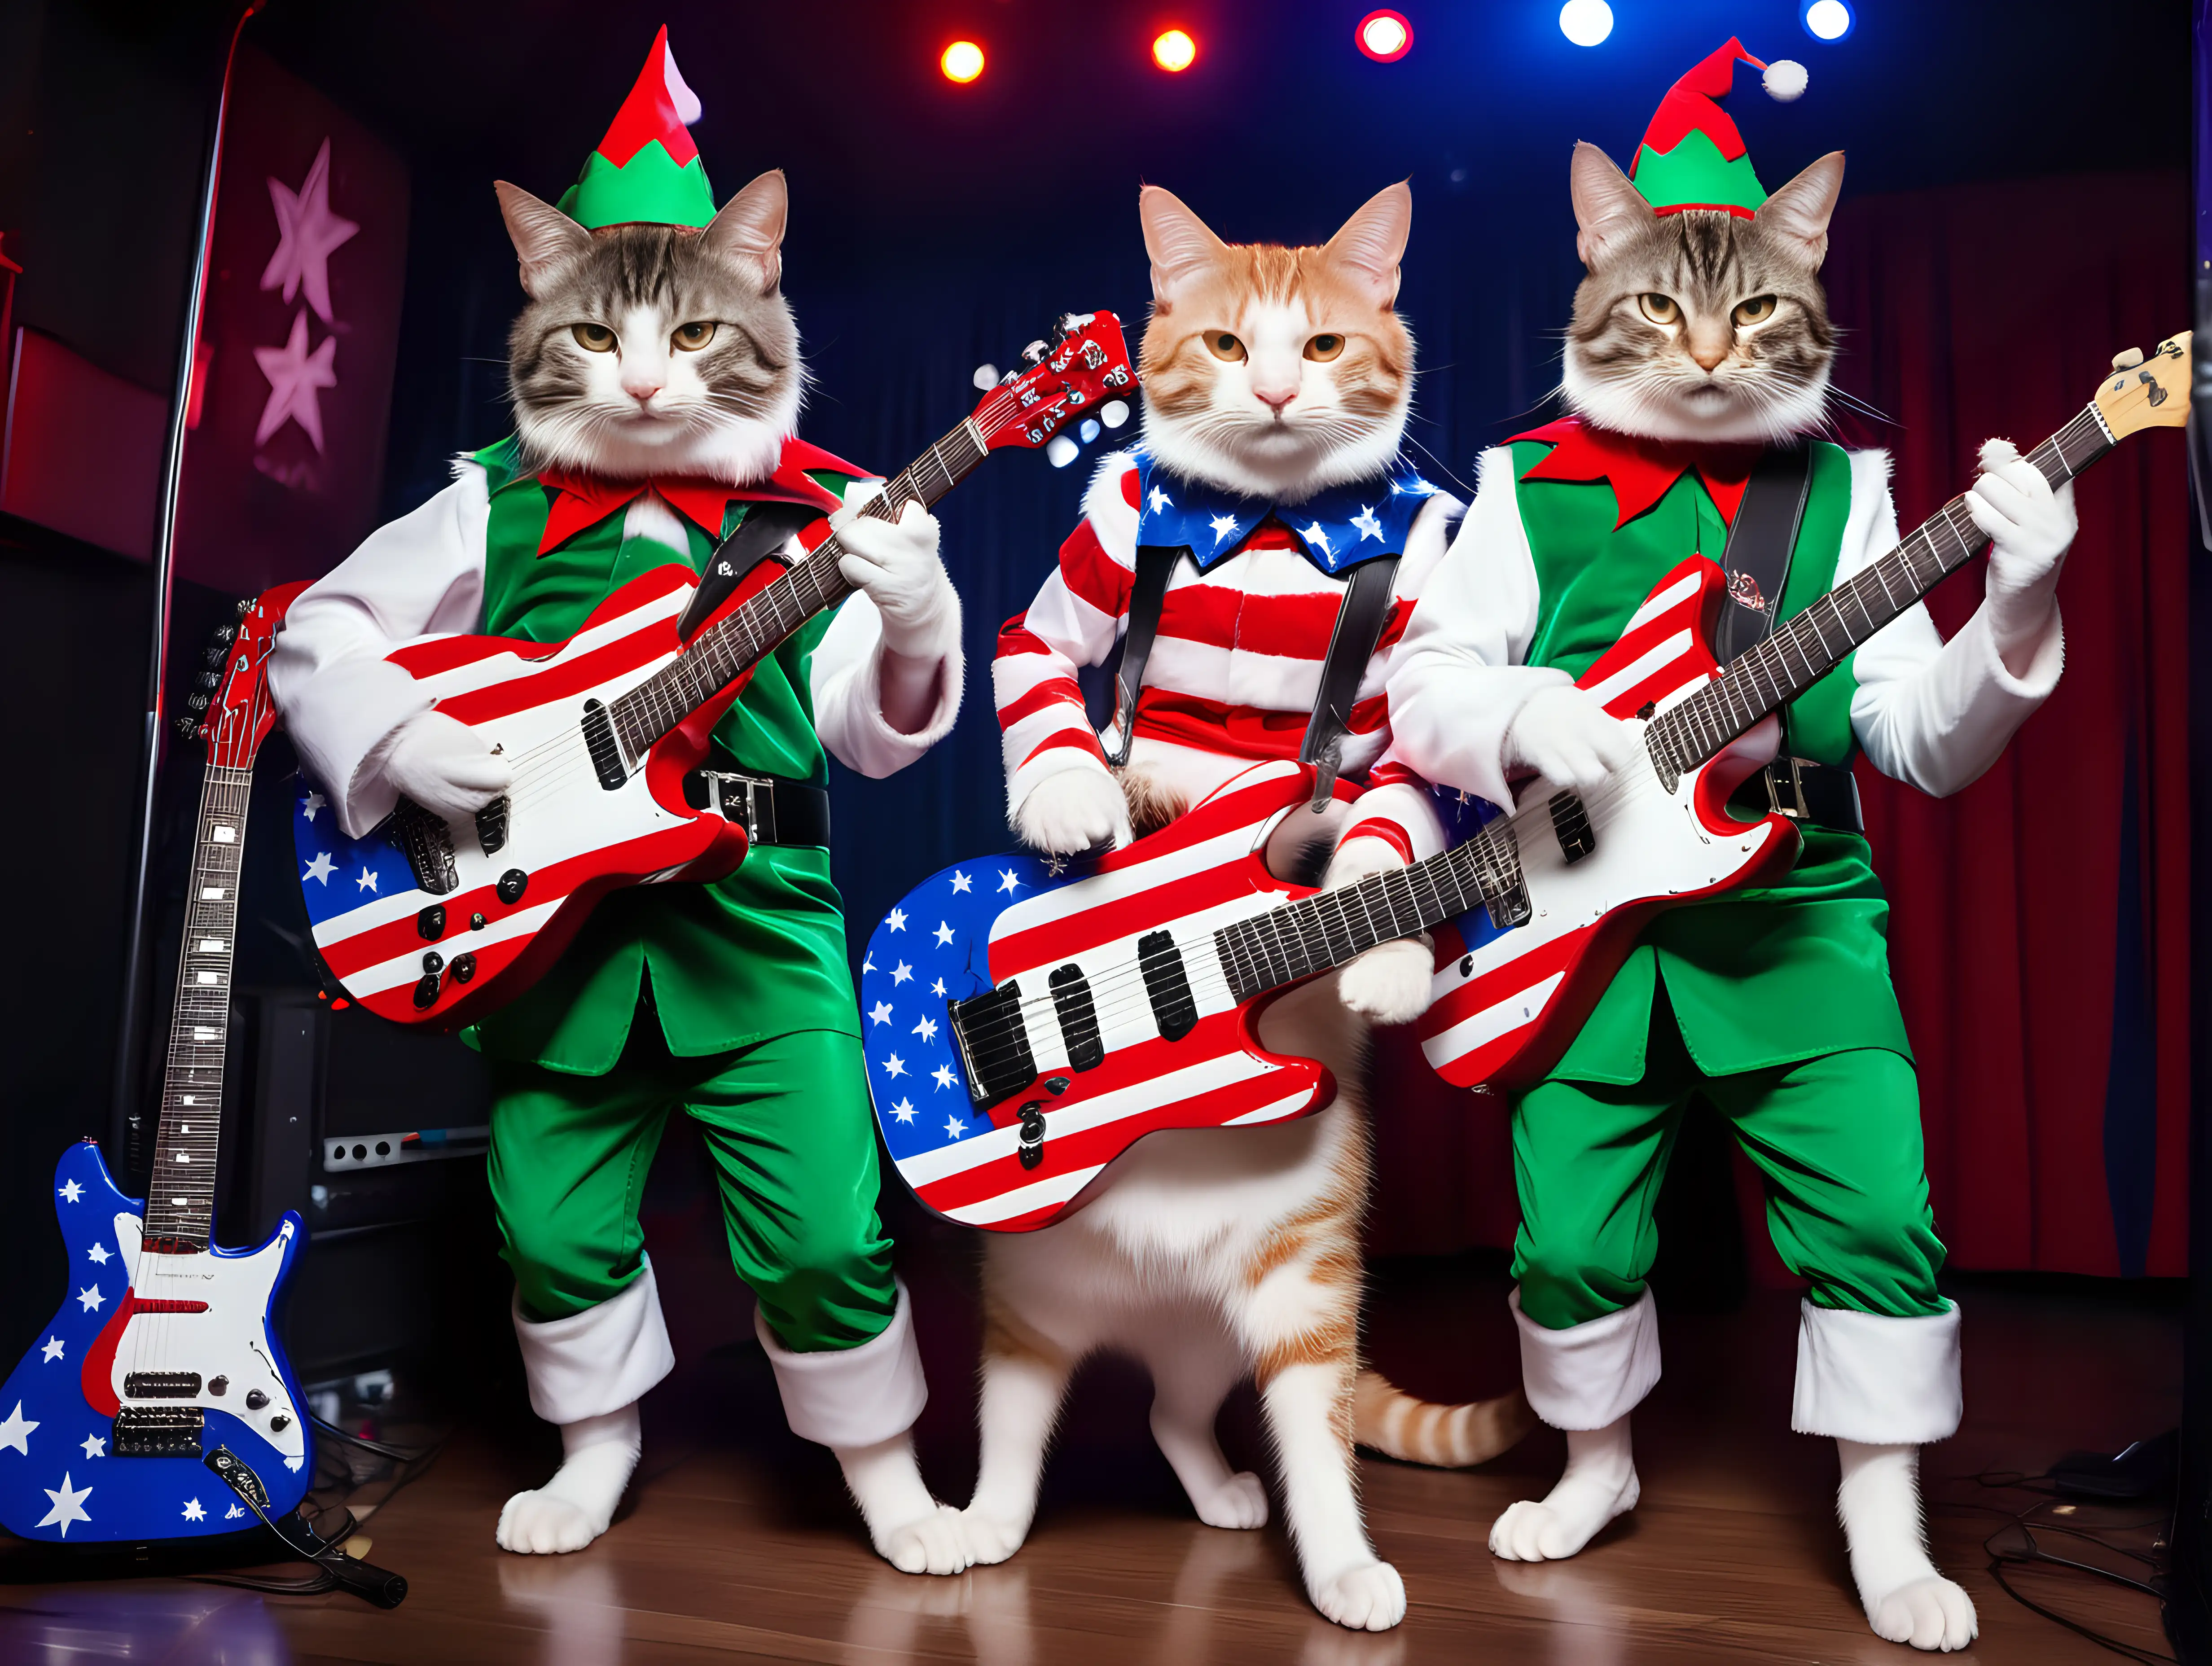 Whimsical Nightclub Scene Cats Jamming on Stars and Stripes Guitars in Elf Costumes